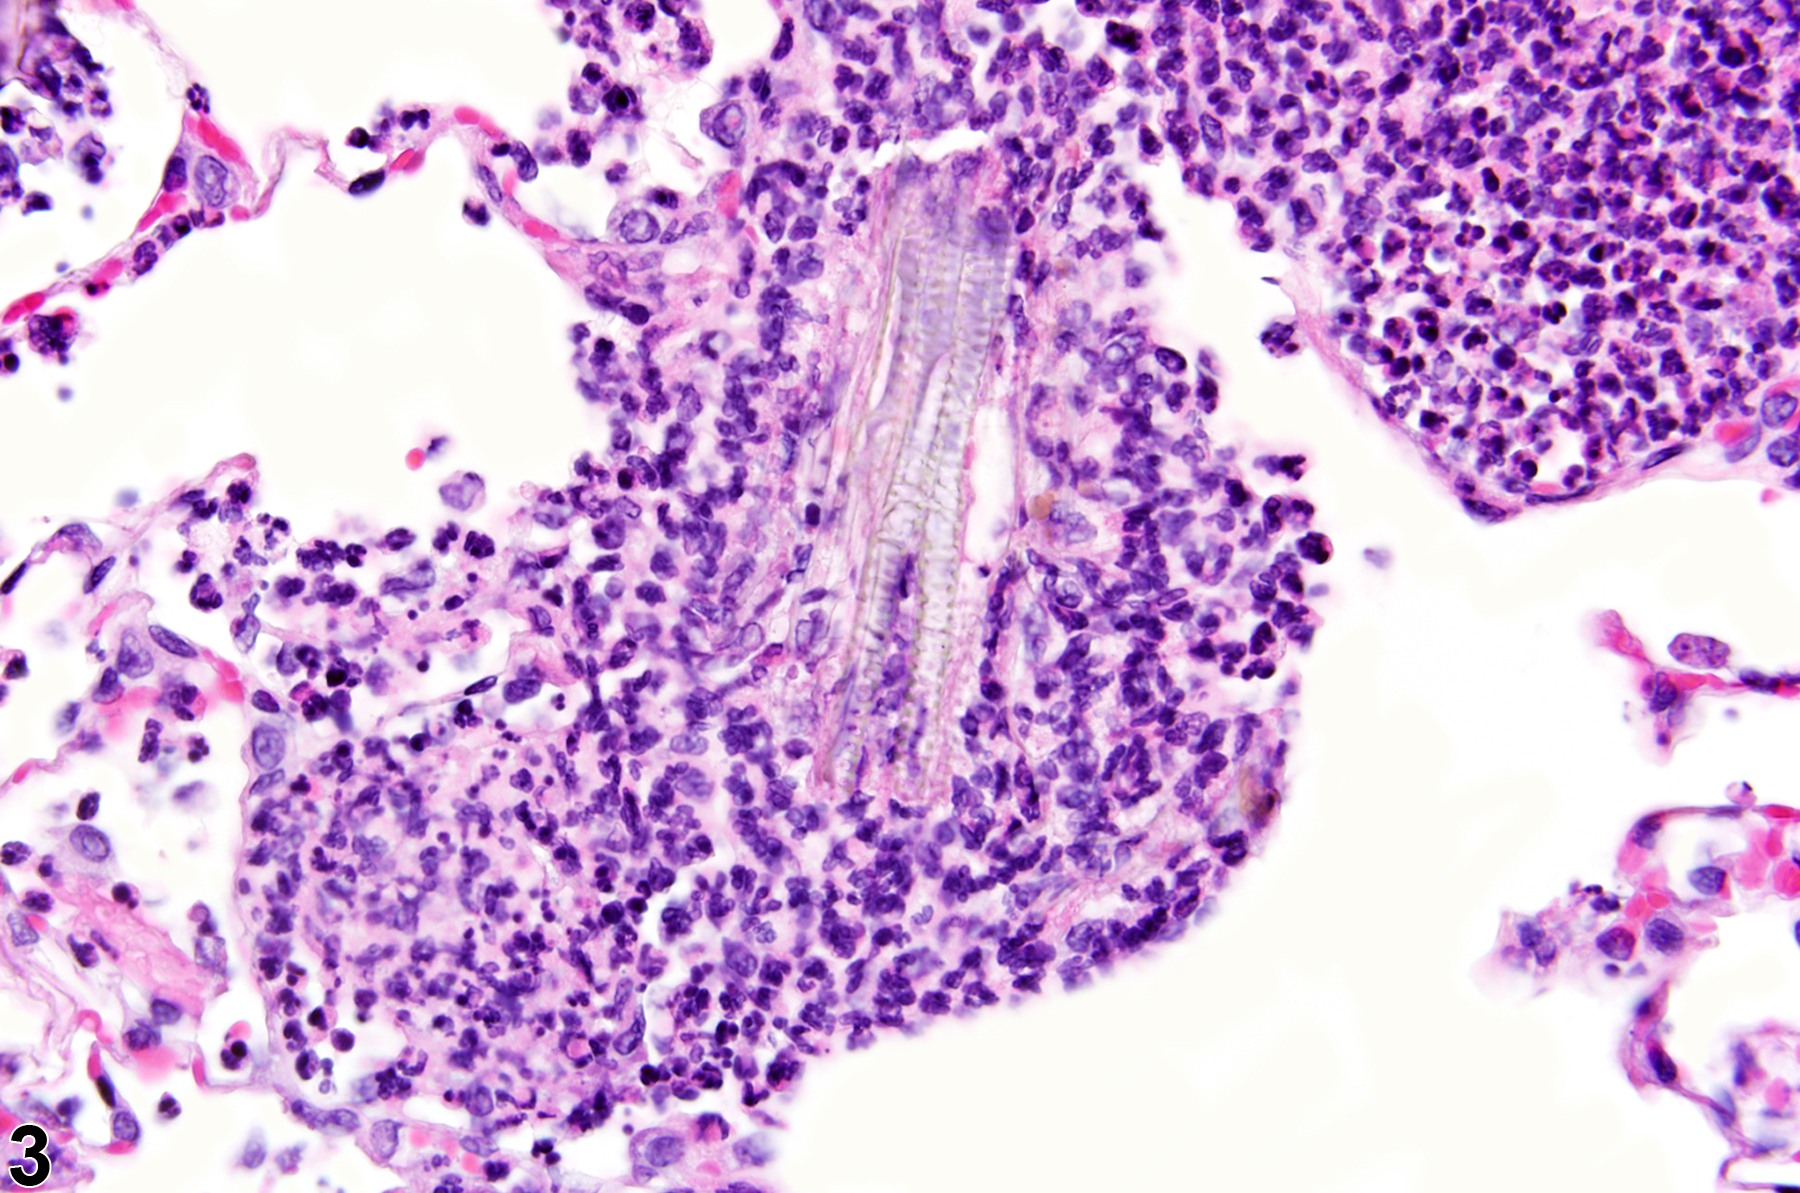 Image of foreign body in the lung from a male Harlan Sprague-Dawley rat in a chronic study